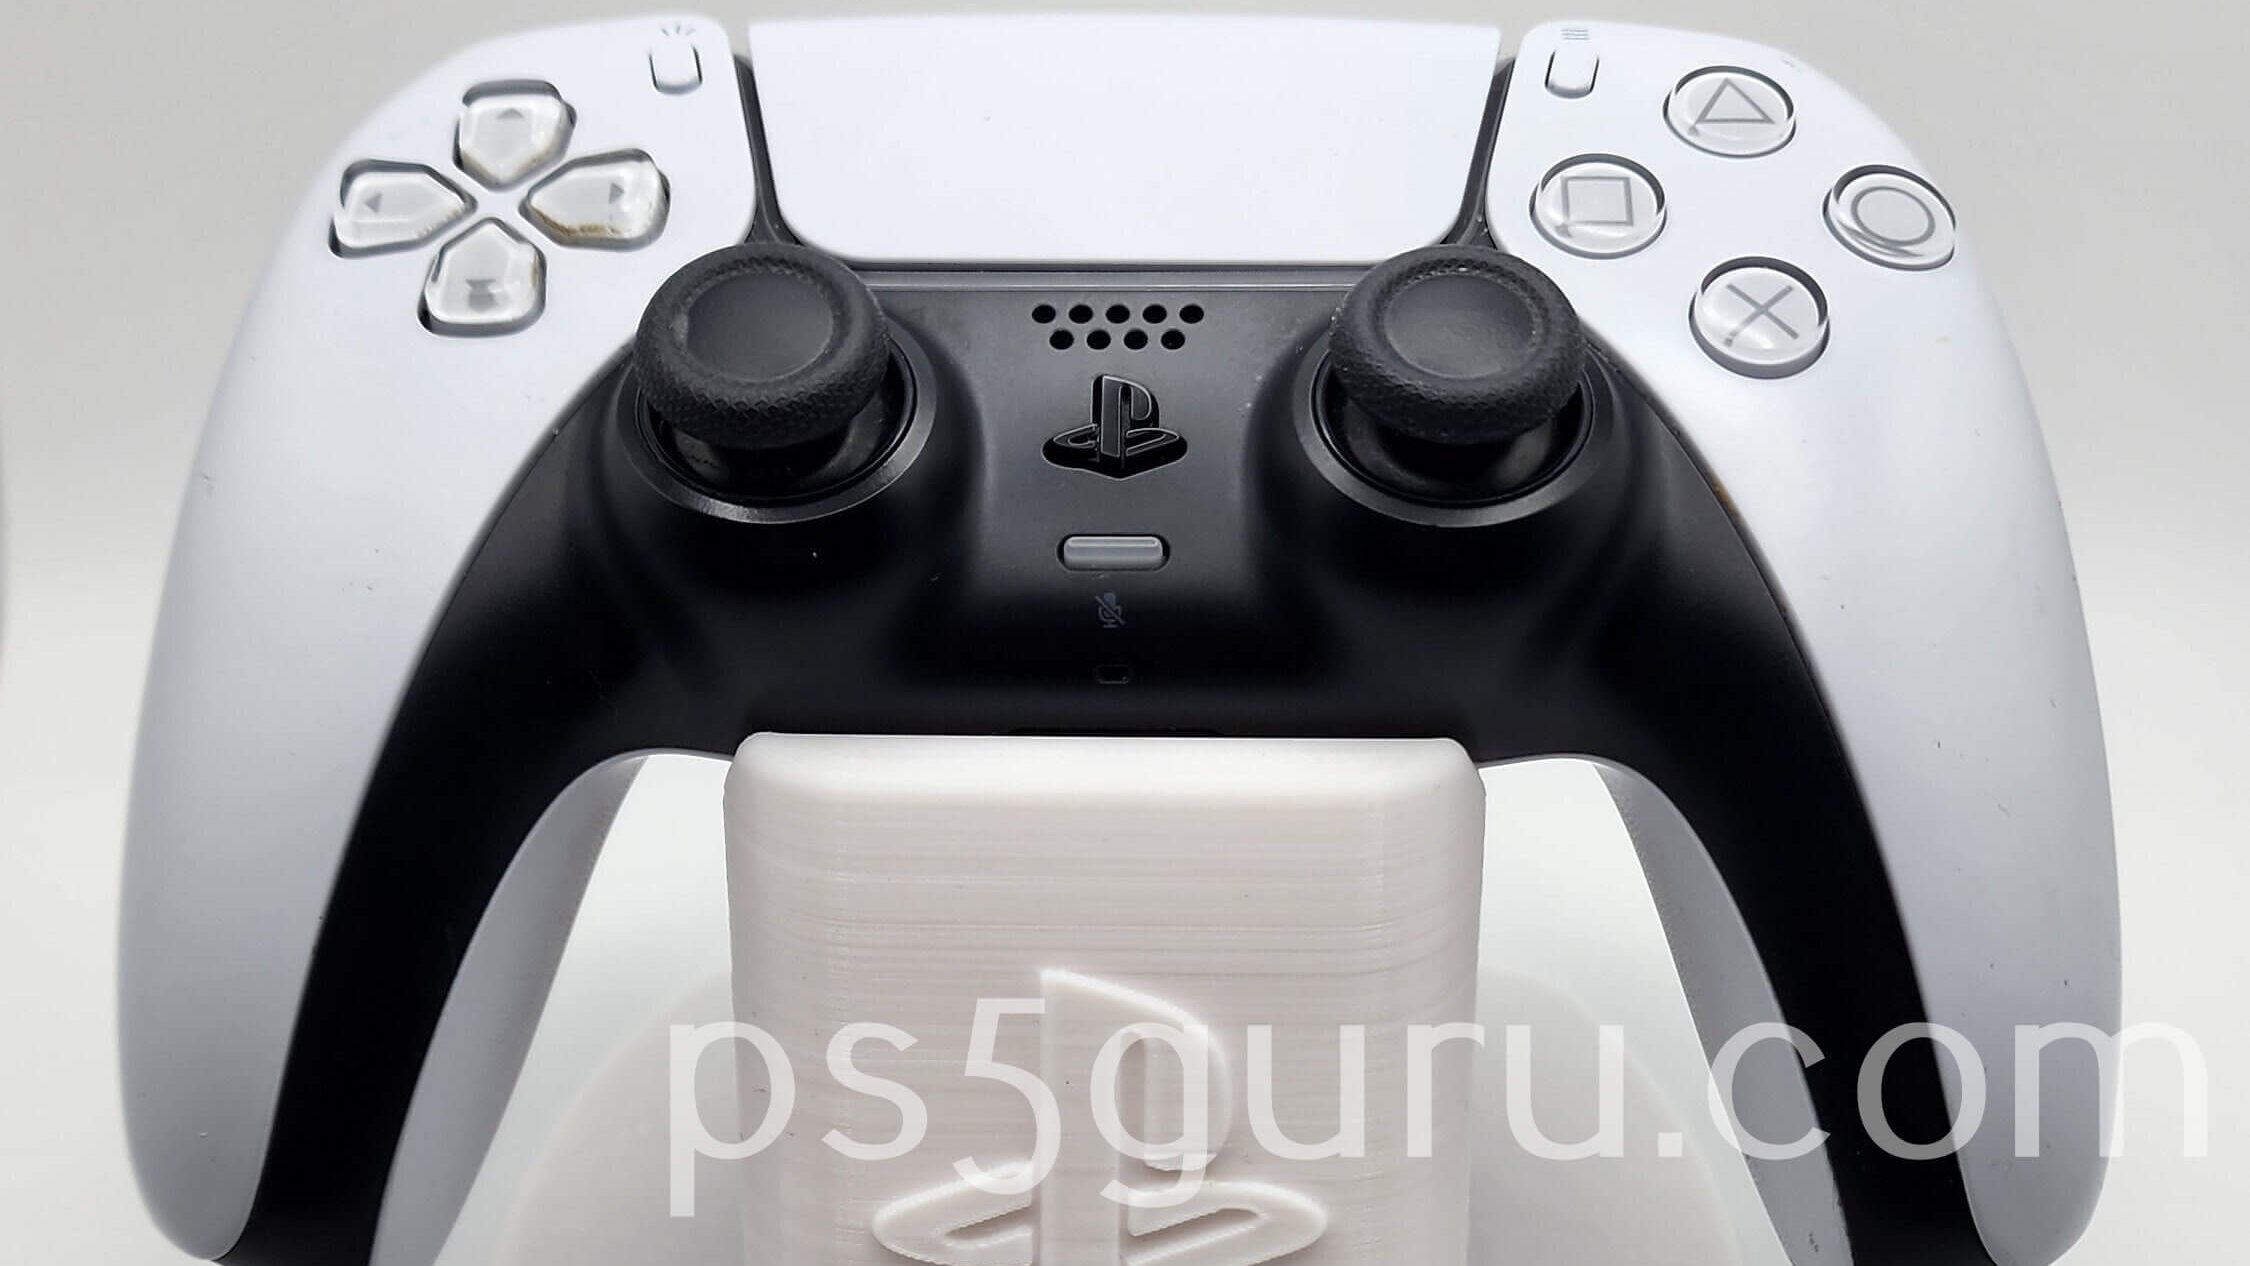 press PS button on PS5 controller - How to Turn On PS5 